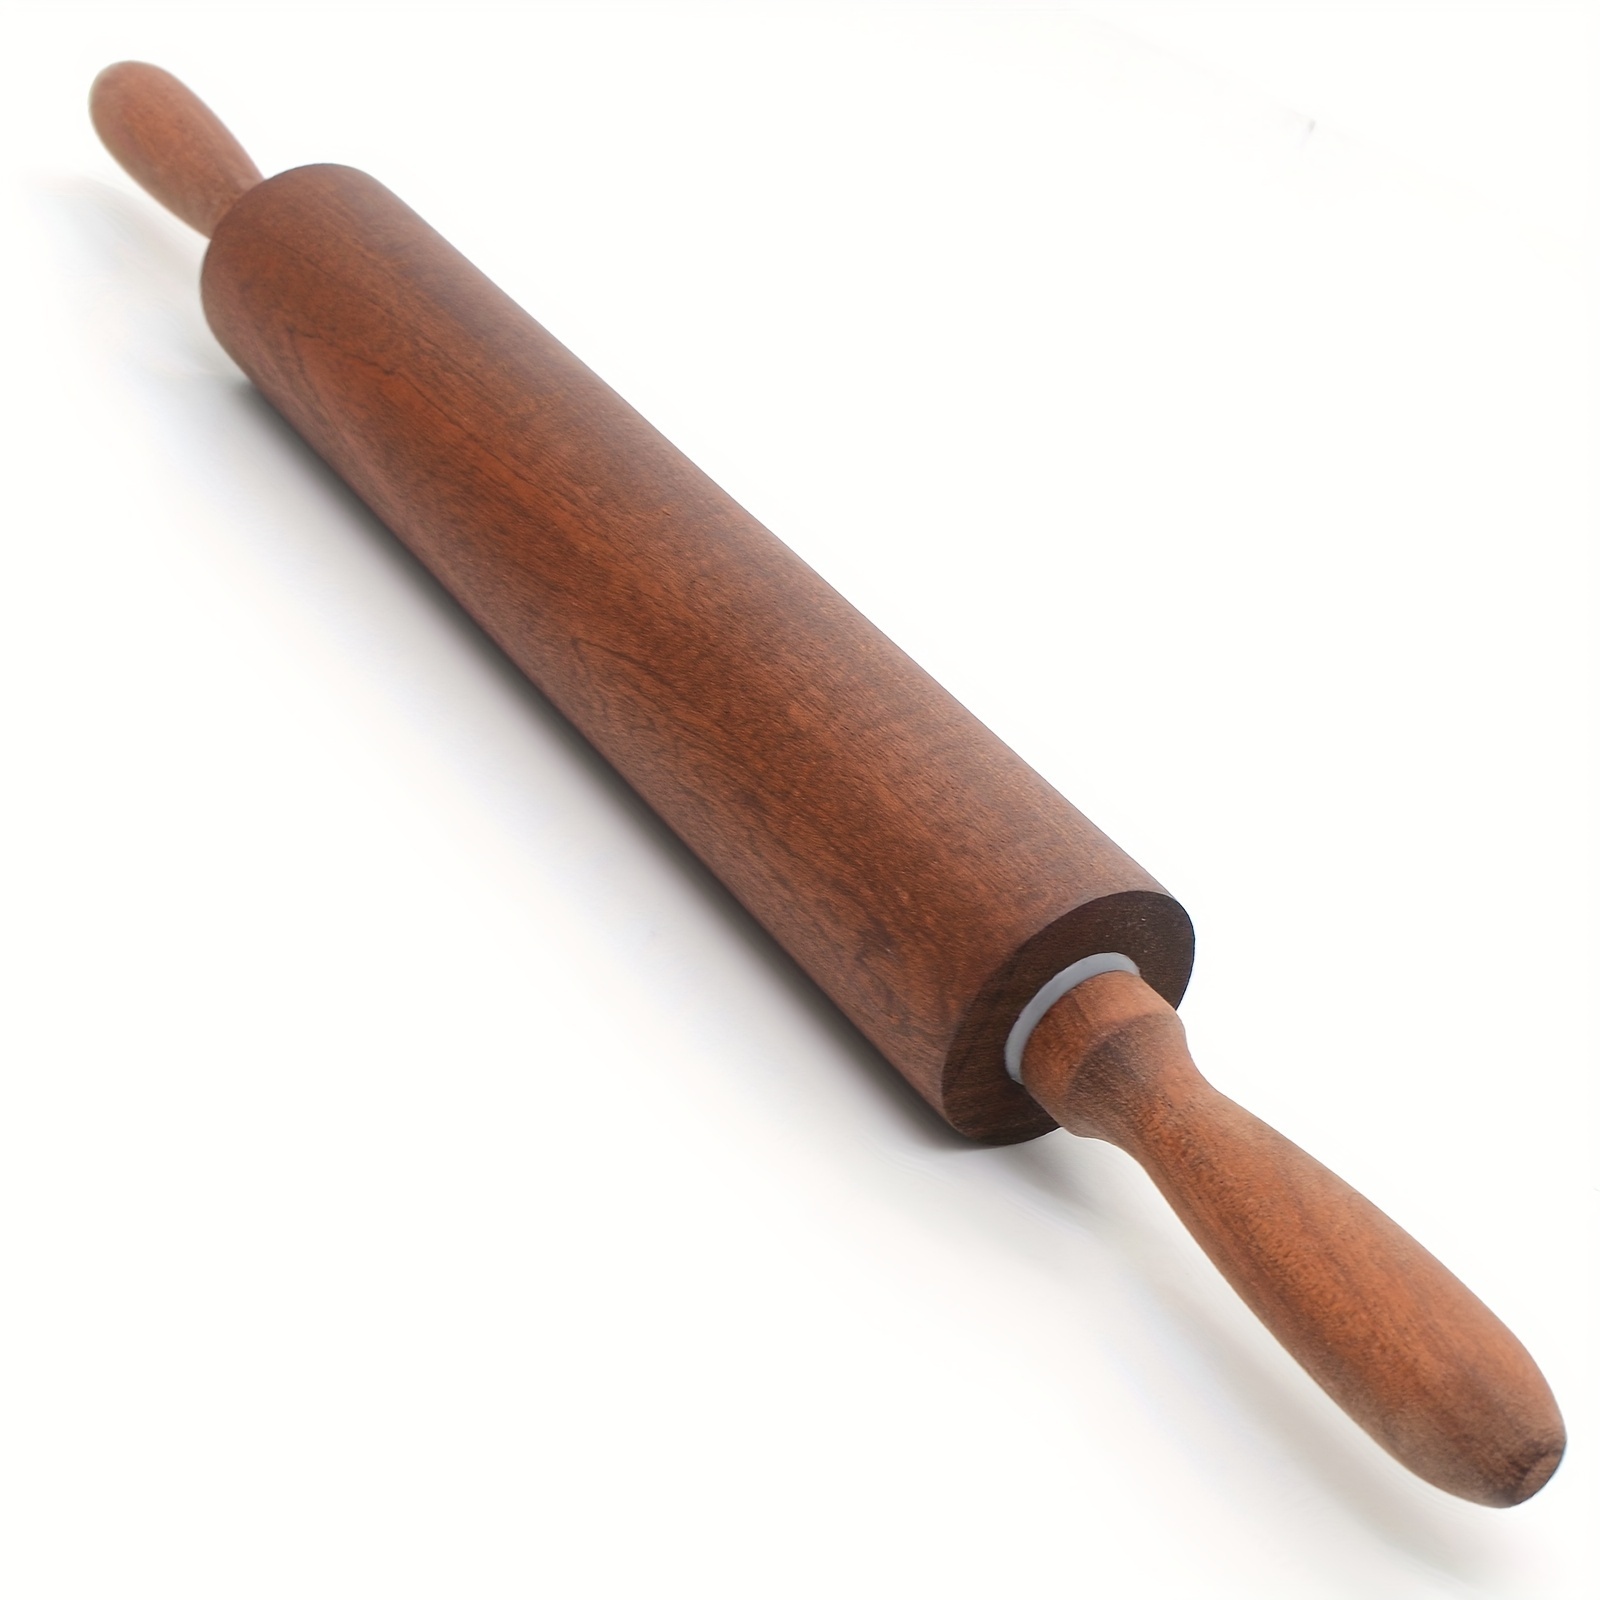 

1pc 17 Inch Wooden Sapele Rolling Pin For Baking, Long Dough Roller For All Baking Needs, Kitchen Accessories